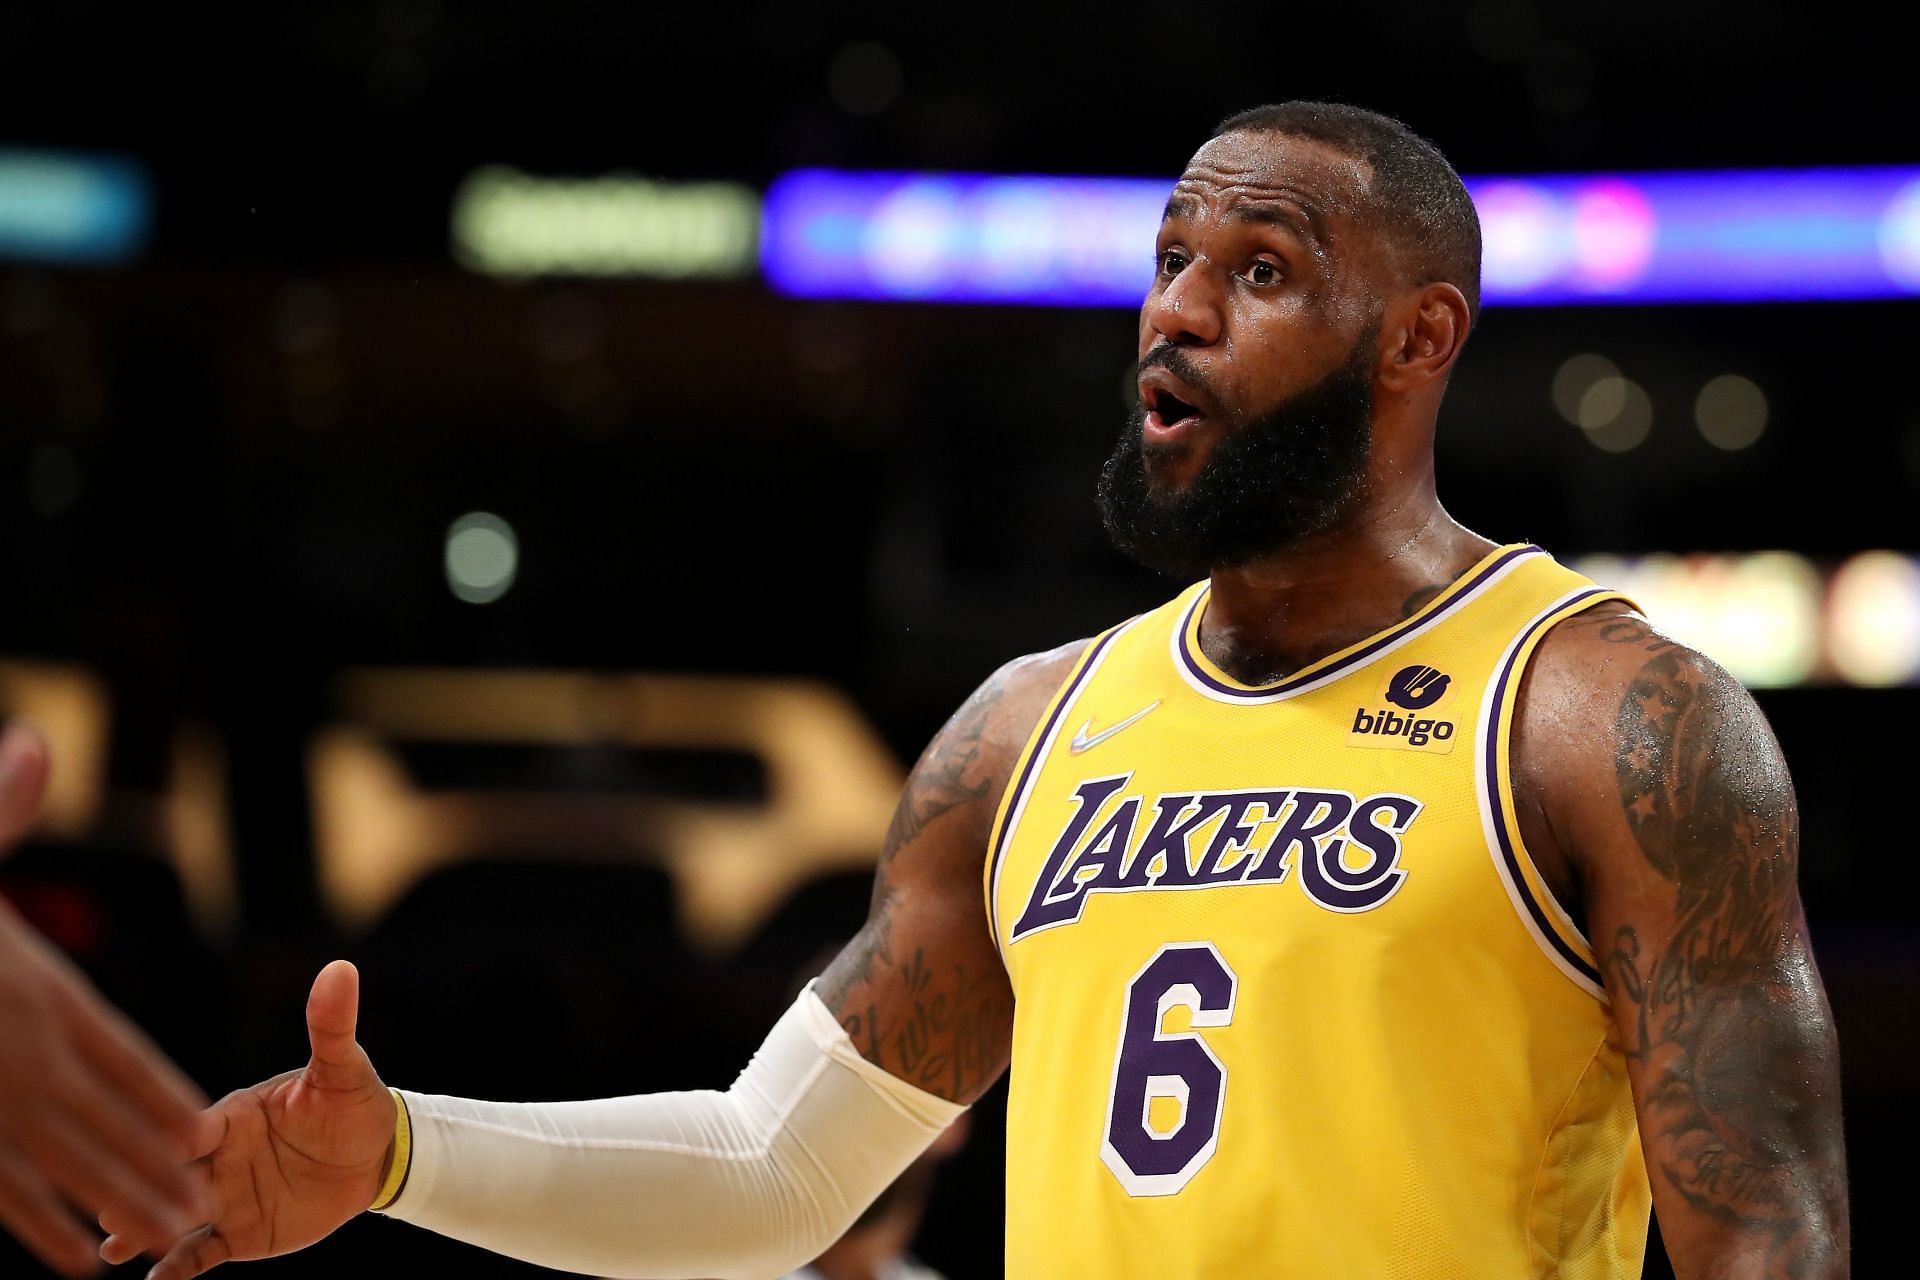 LeBron James of the LA Lakers reacts after scoring a basket